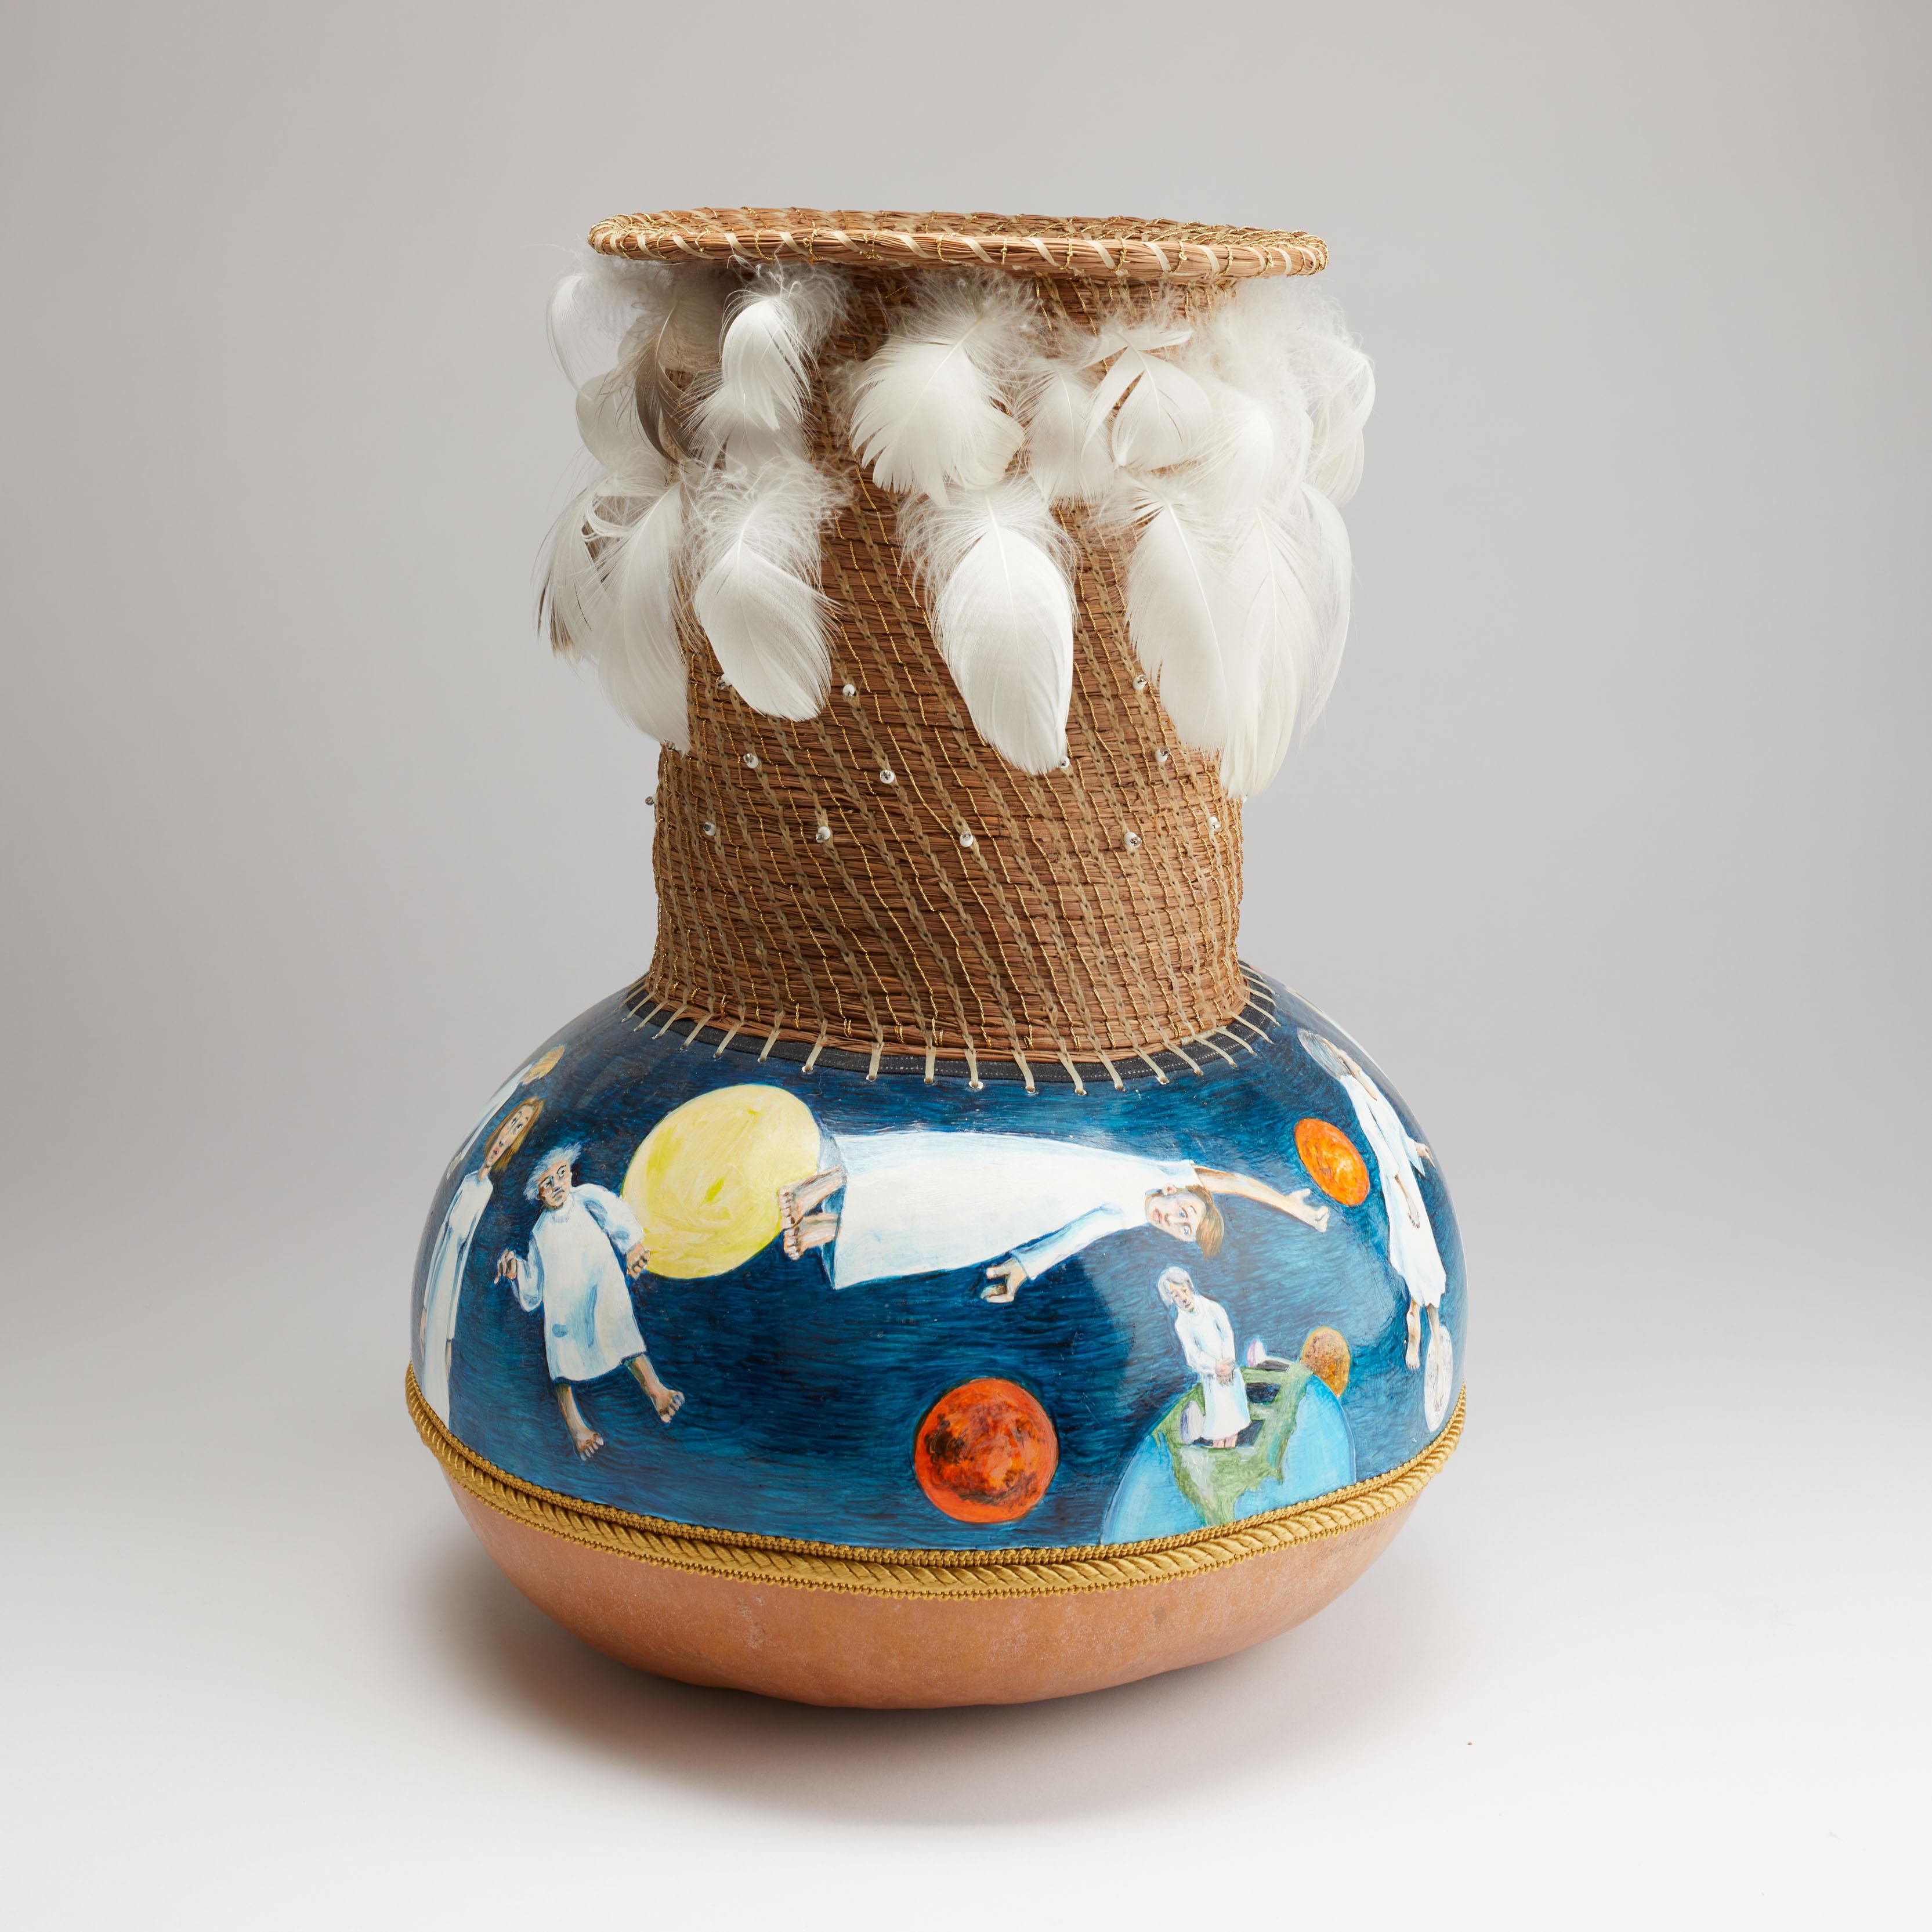 Gourd pot sculpture made of traditional materials of pine needles with beeswax sealant, gourd lined with pine sap, oil paint on applied primed canvas, cotton cloth, feathers, loom beading.